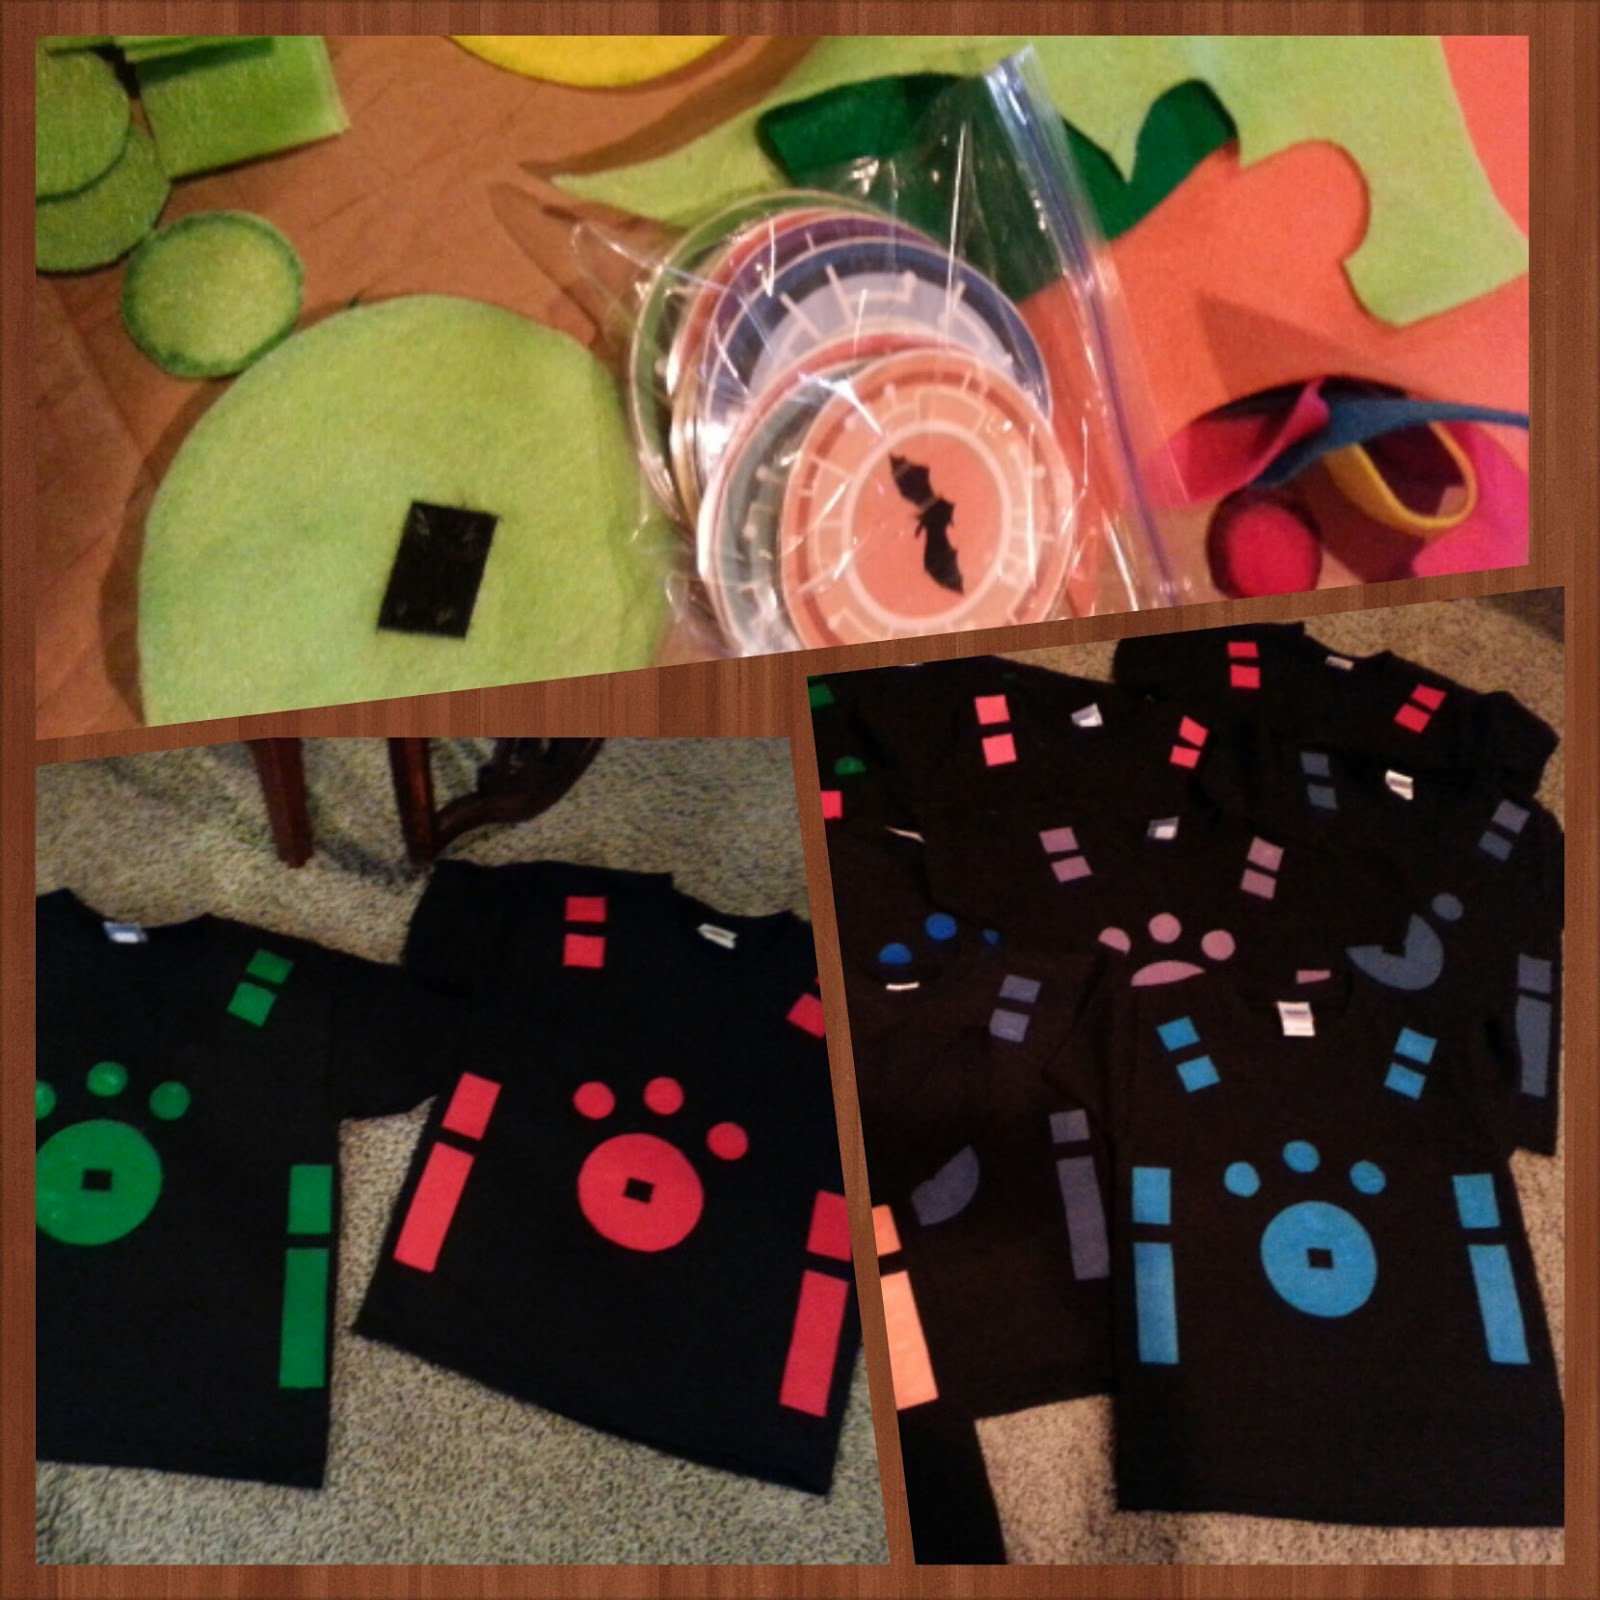 Wild Kratts Birthday Party Ideas
 Events By Ellie Wild Kratts Birthday Party